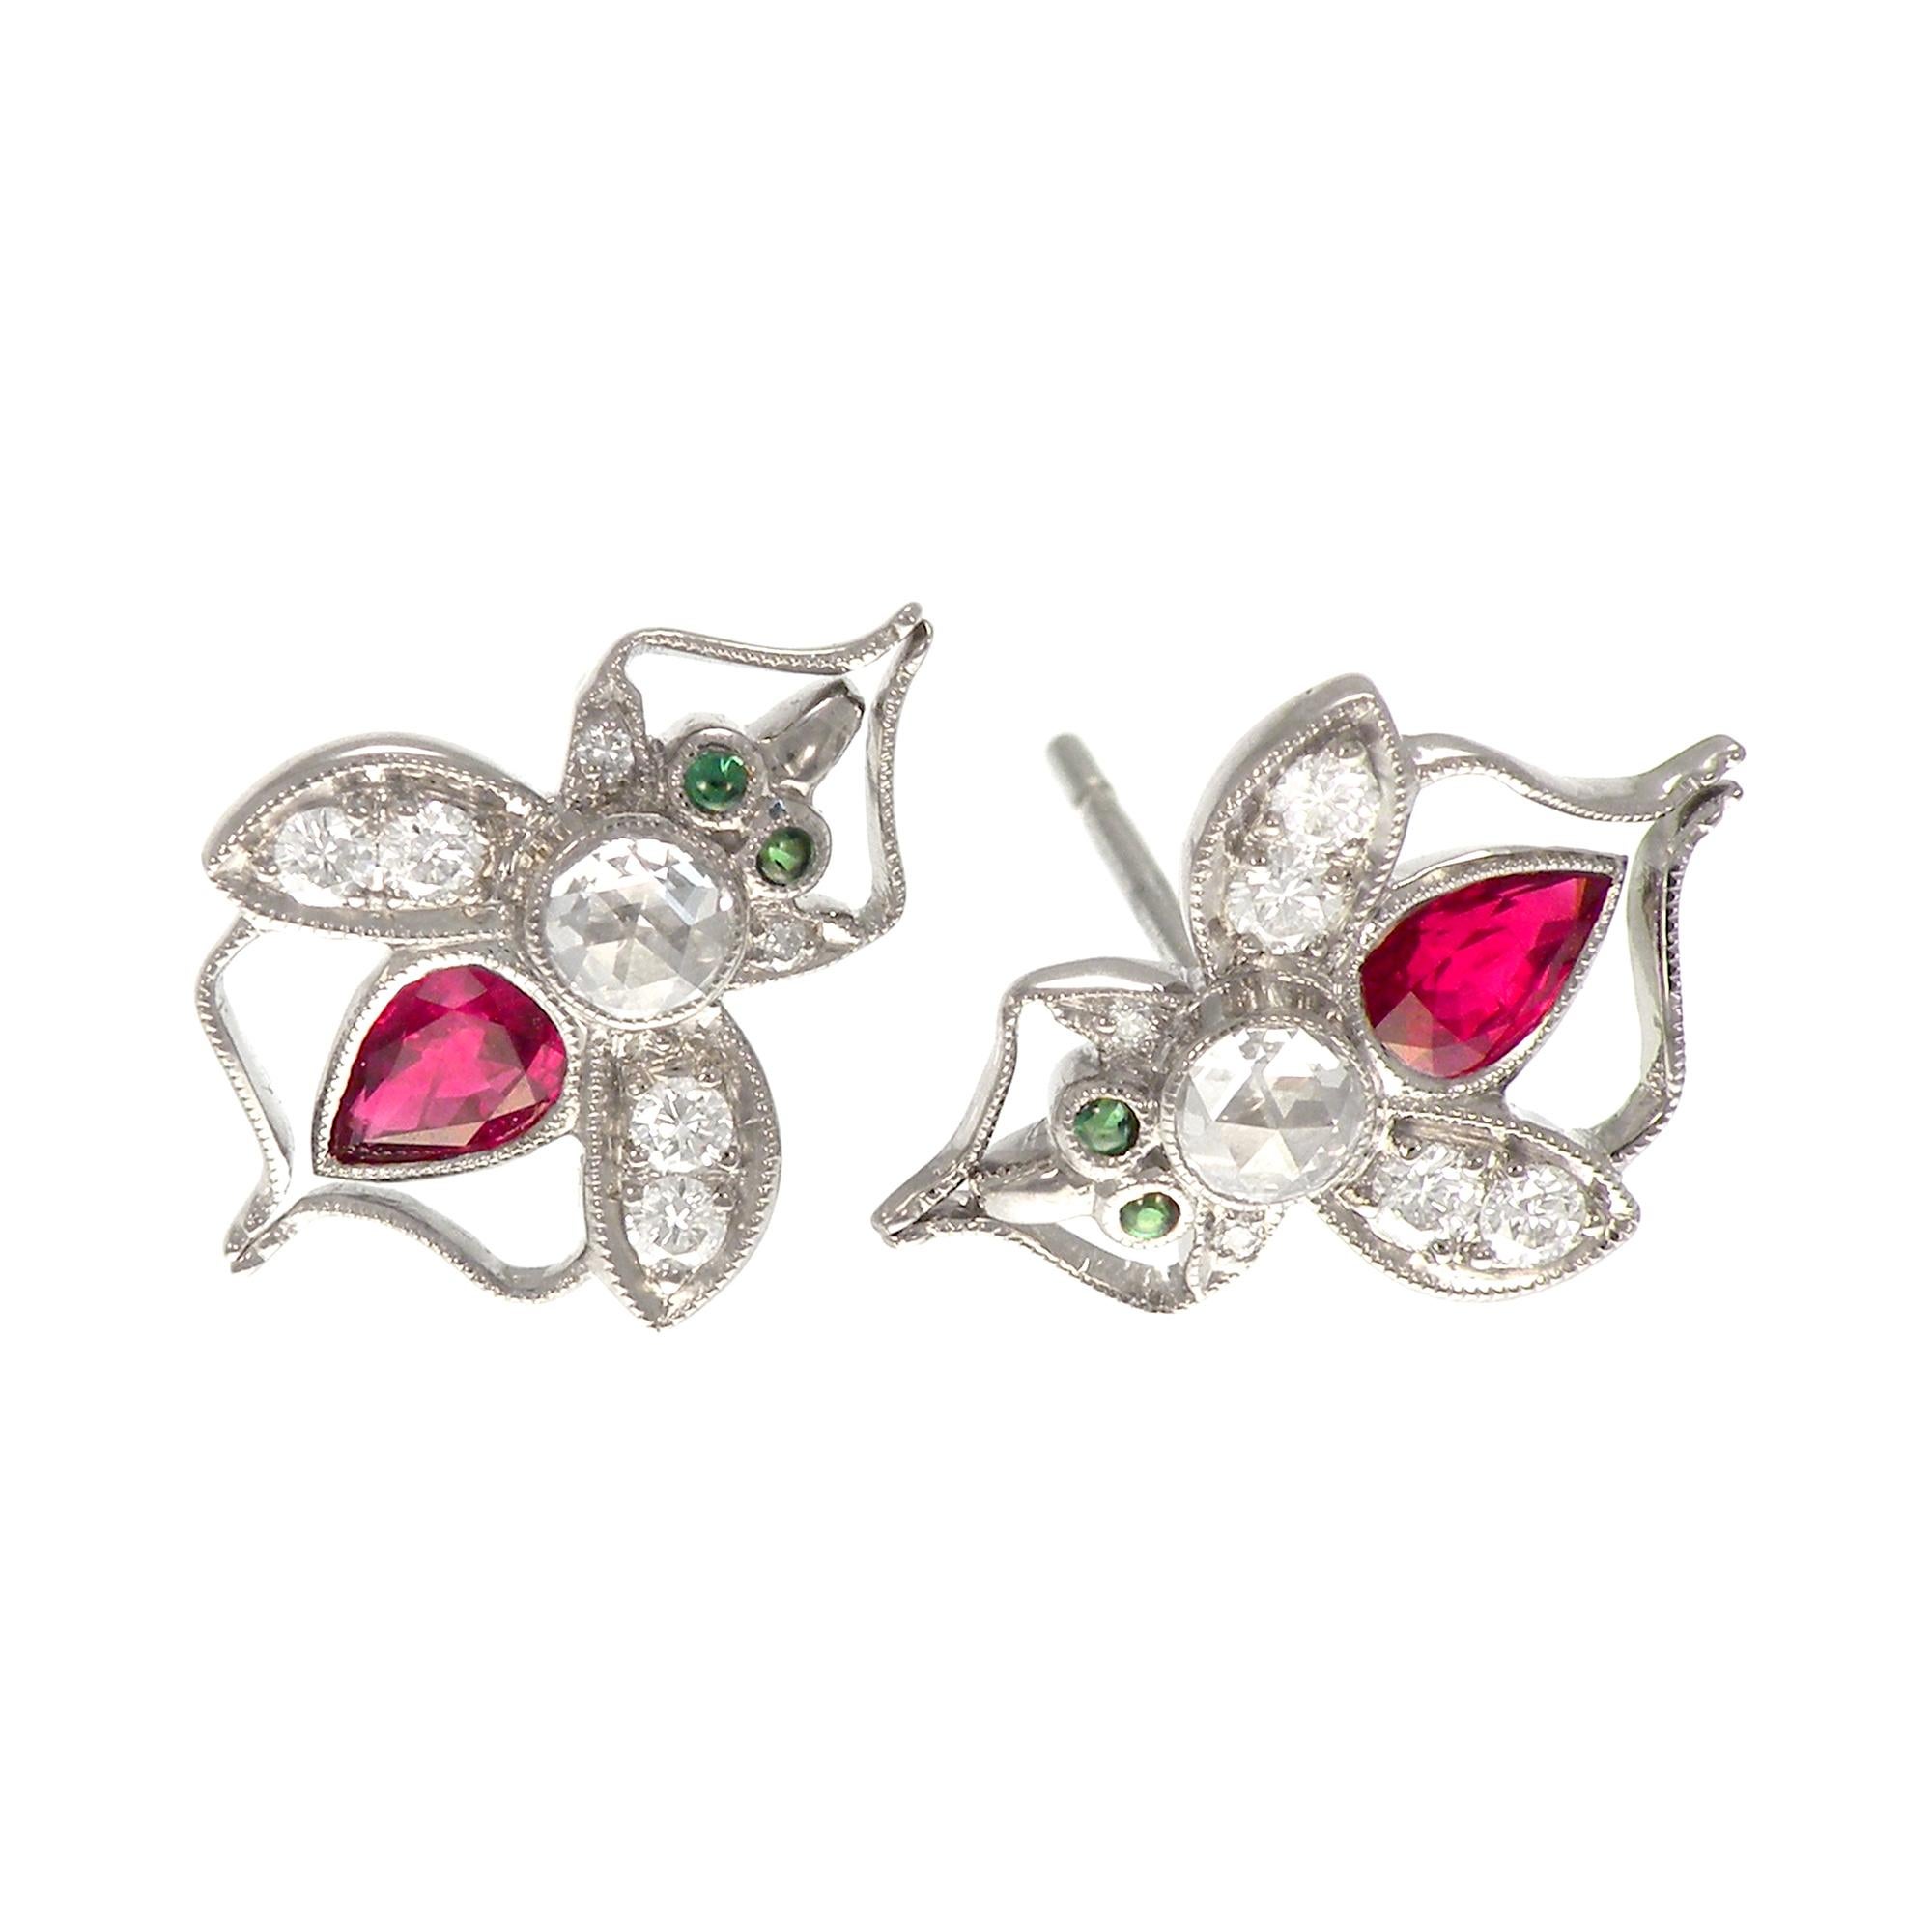 
An antique style bee brooch stud earrings drawing inspiration from the Victorian insect jewelry beloved by that generation's interest in the natural world. The bee is set with rich red faceted ruby for the body and cabochon green garnet eyes of the